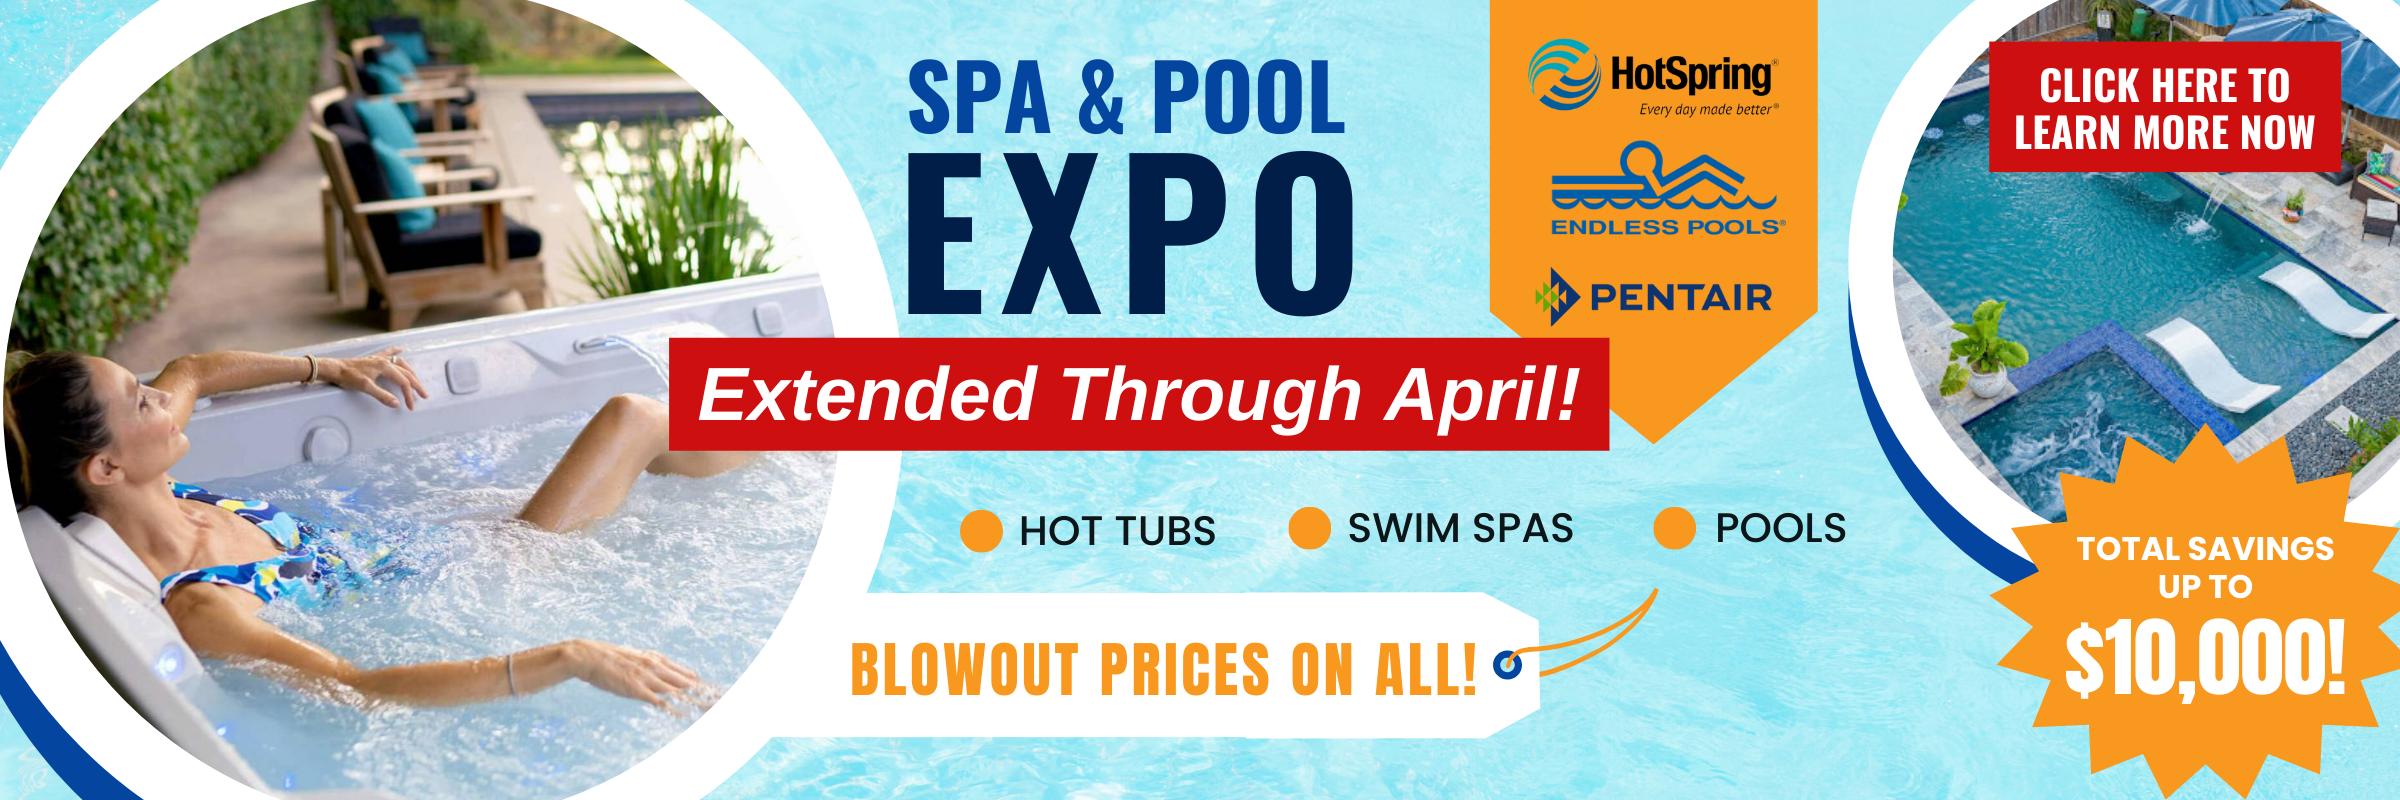 Spa and Pool expo this week only - big savings